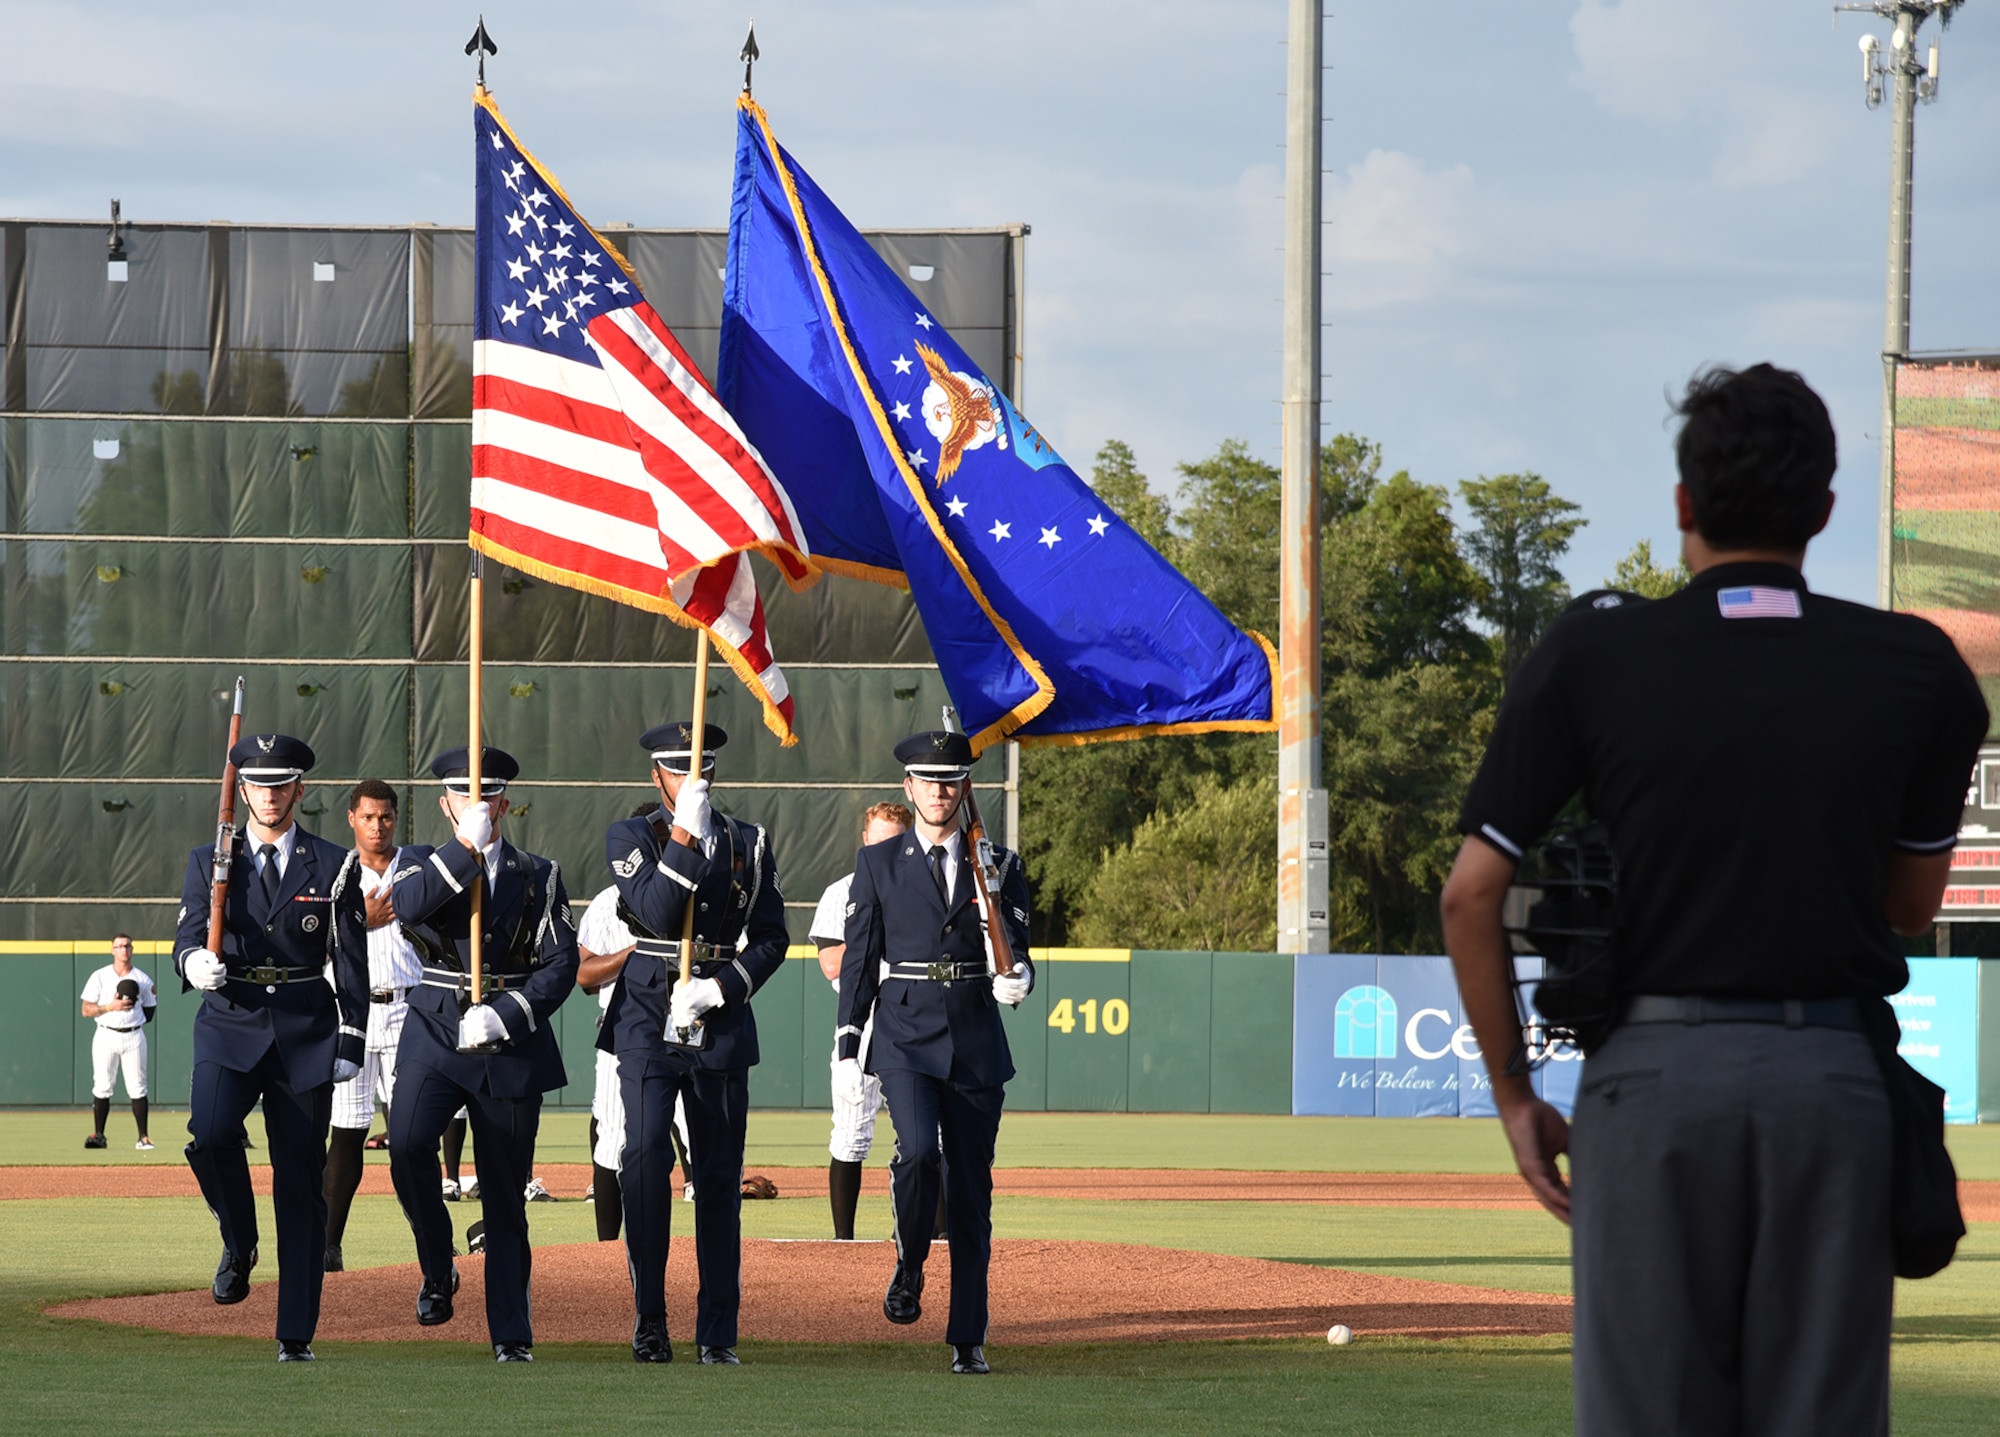 During a Florida Fire Frogs minor league baseball game August 18, 2017, the Patrick Air Force Base Honor Guard presented the colors to honor all military and 1st responders, and to pay special tribute to Senior Airman Kevin Greene, the 920th Rescue Wing’s first single amputee to return to military service after a tragic accident resulted in the amputation of part of his left leg. He attended the game with his little girl and girlfriend. (U.S. Air Force photo/Maj. Cathleen Snow)